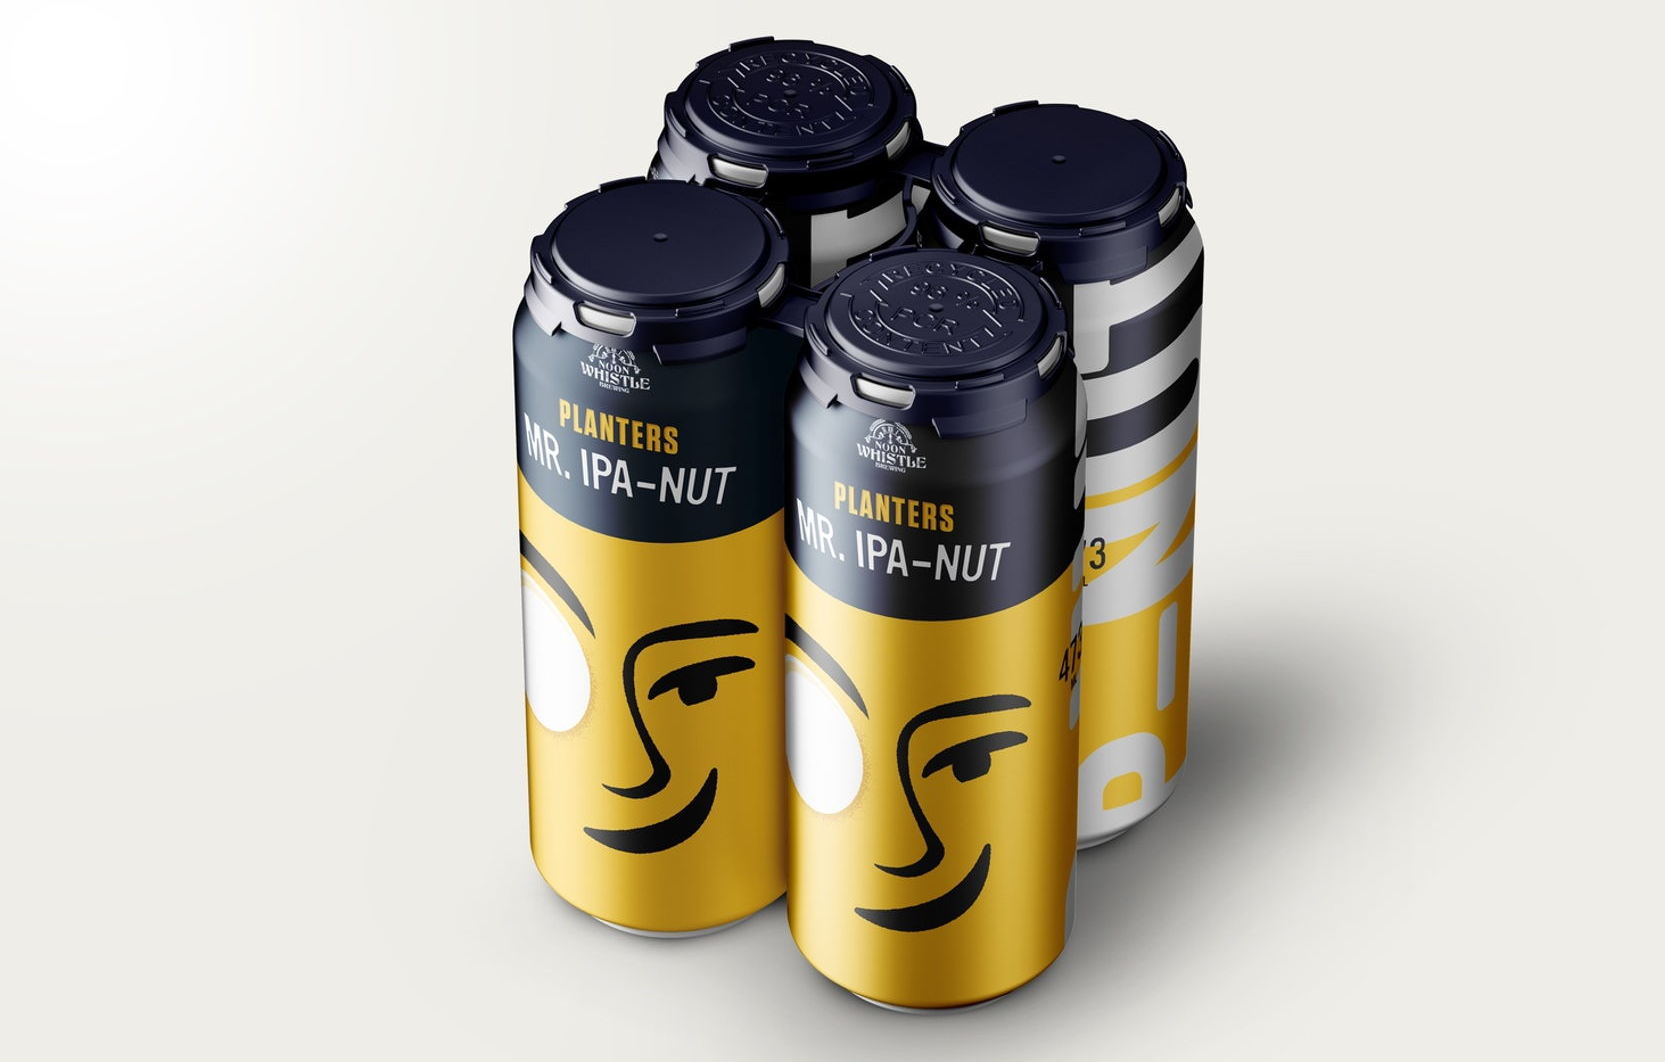 Planters Steps Into the Wonderful World of Beer With Mr. IPA-Nut | Dieline1665 x 1062